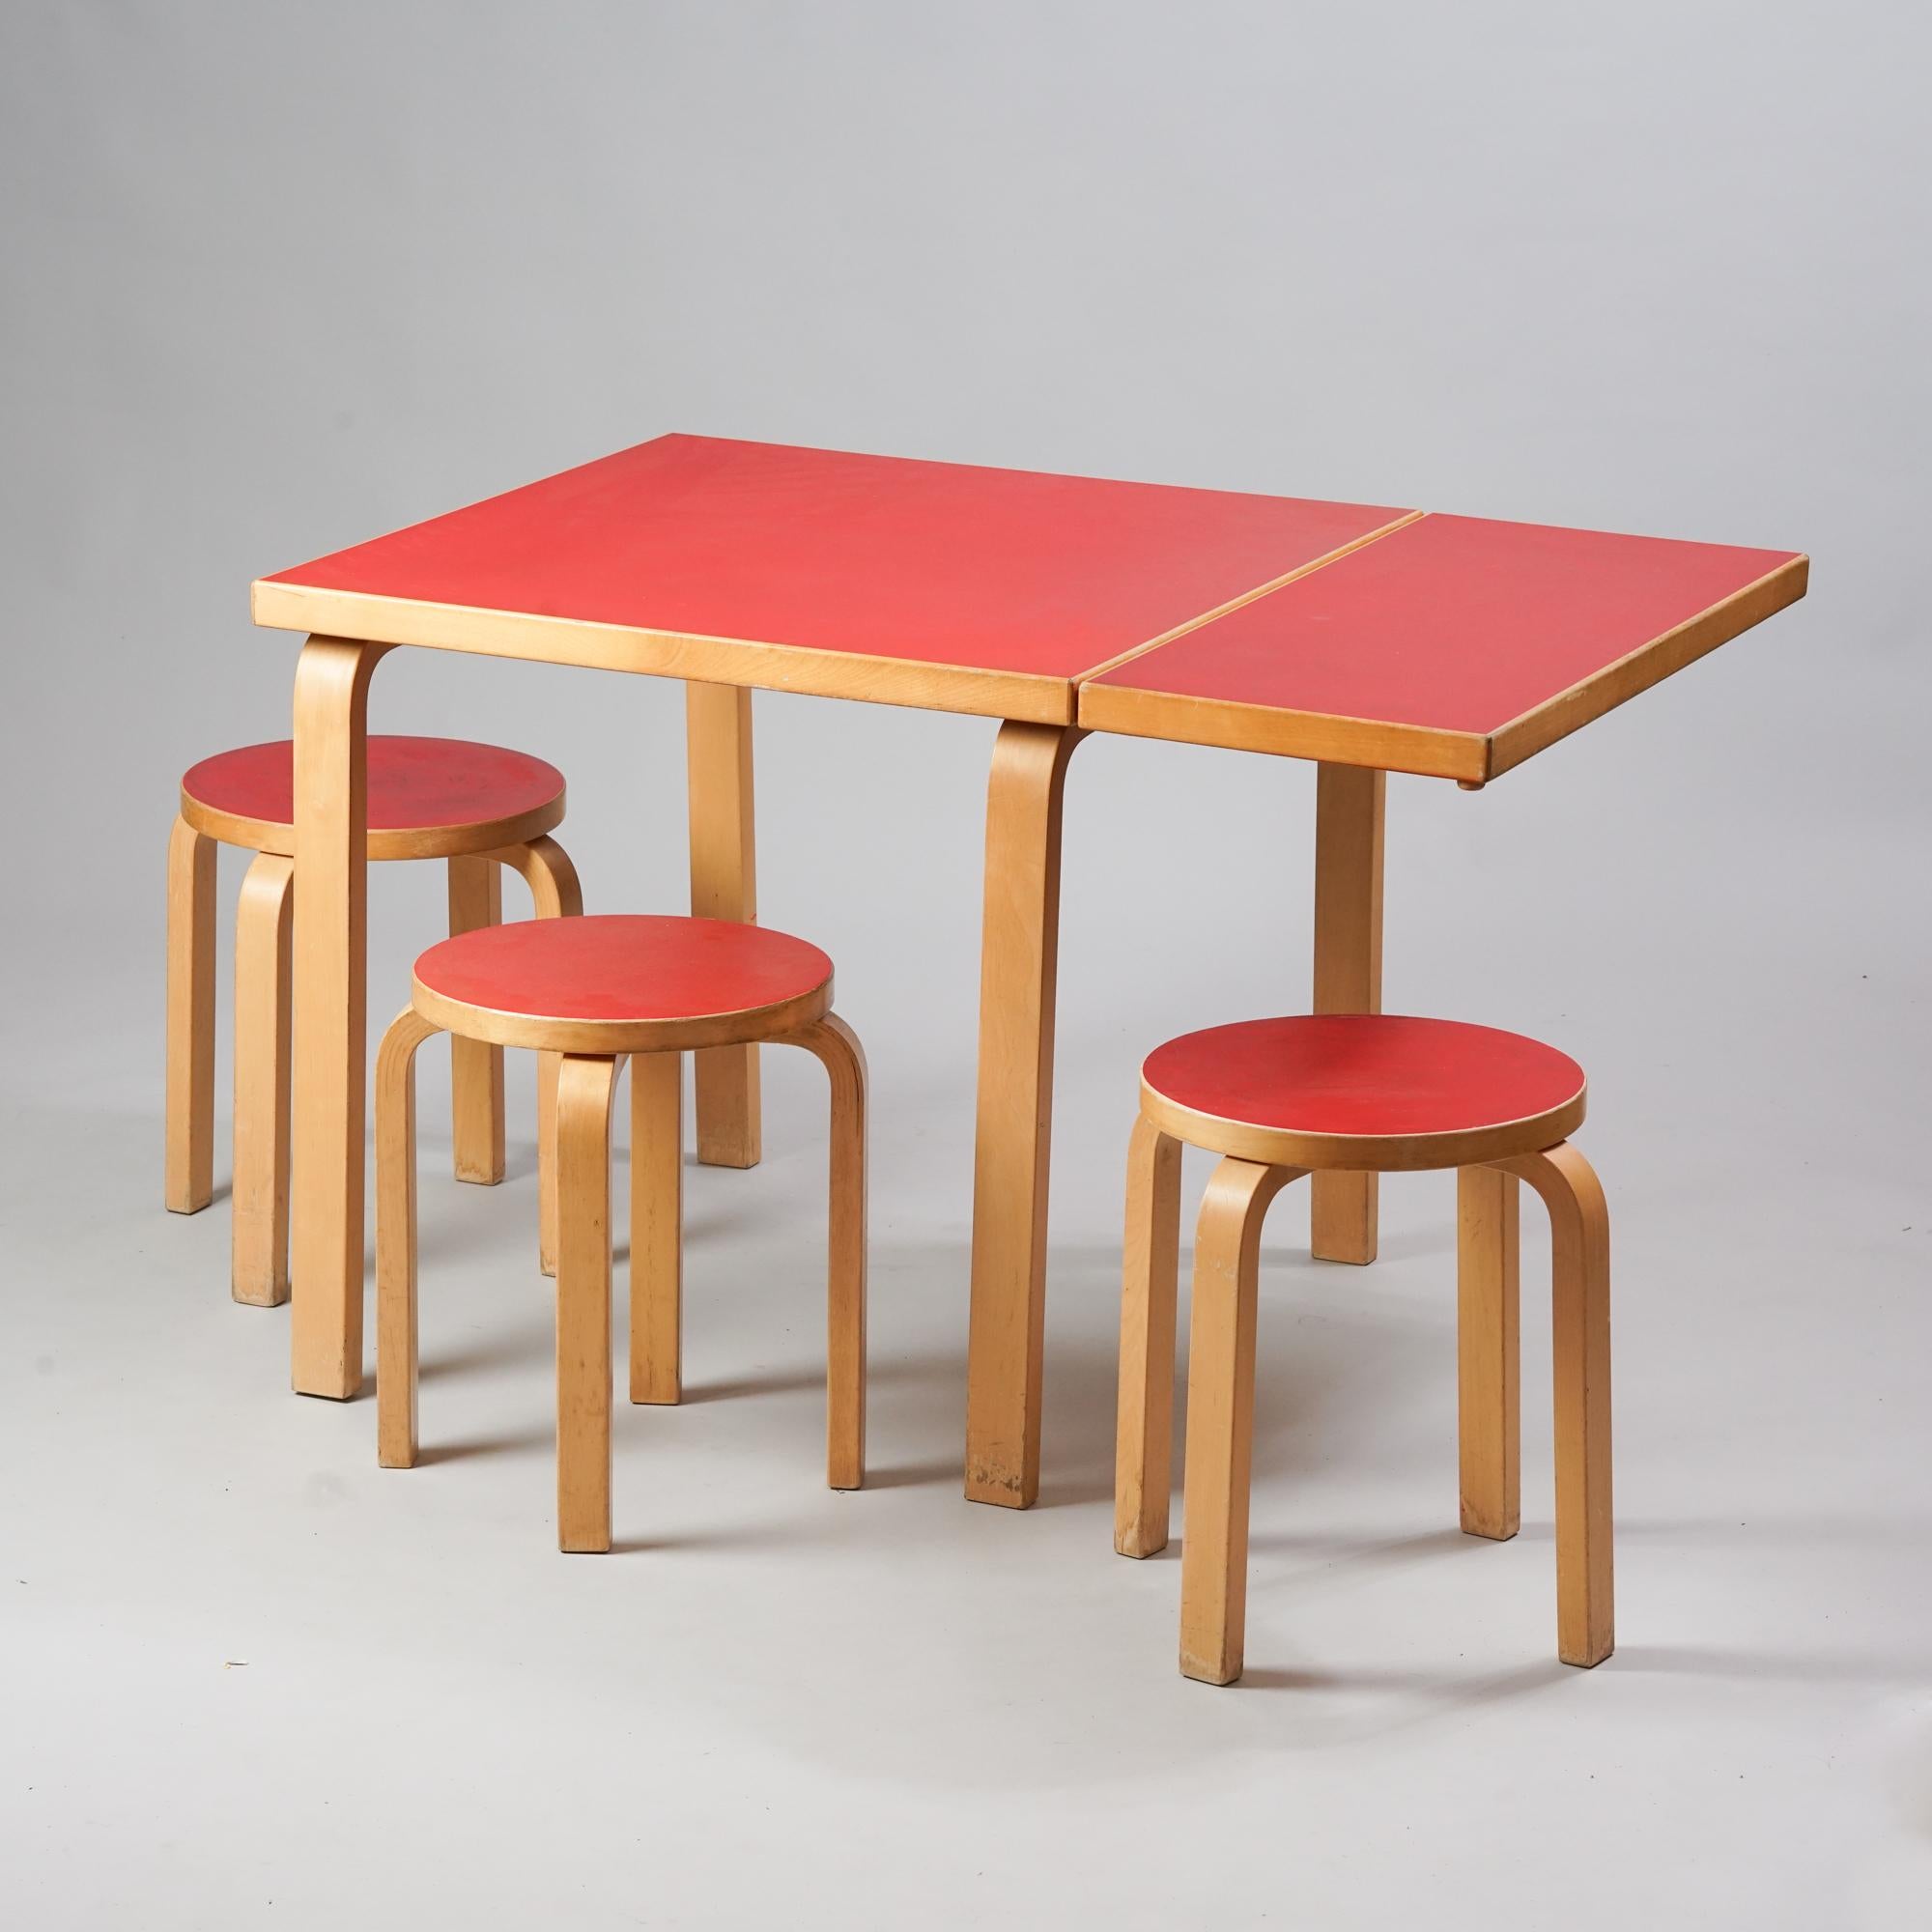 Alvar Aalto Dining Room Set, manufactured by Oy Huonekalu - ja Rakennustyötehdas Ab, 1950s. The set consists of extendable table and three model E60 stools. Birch with linoleum tops. Good vintage condition, patina and wear consistent with age and